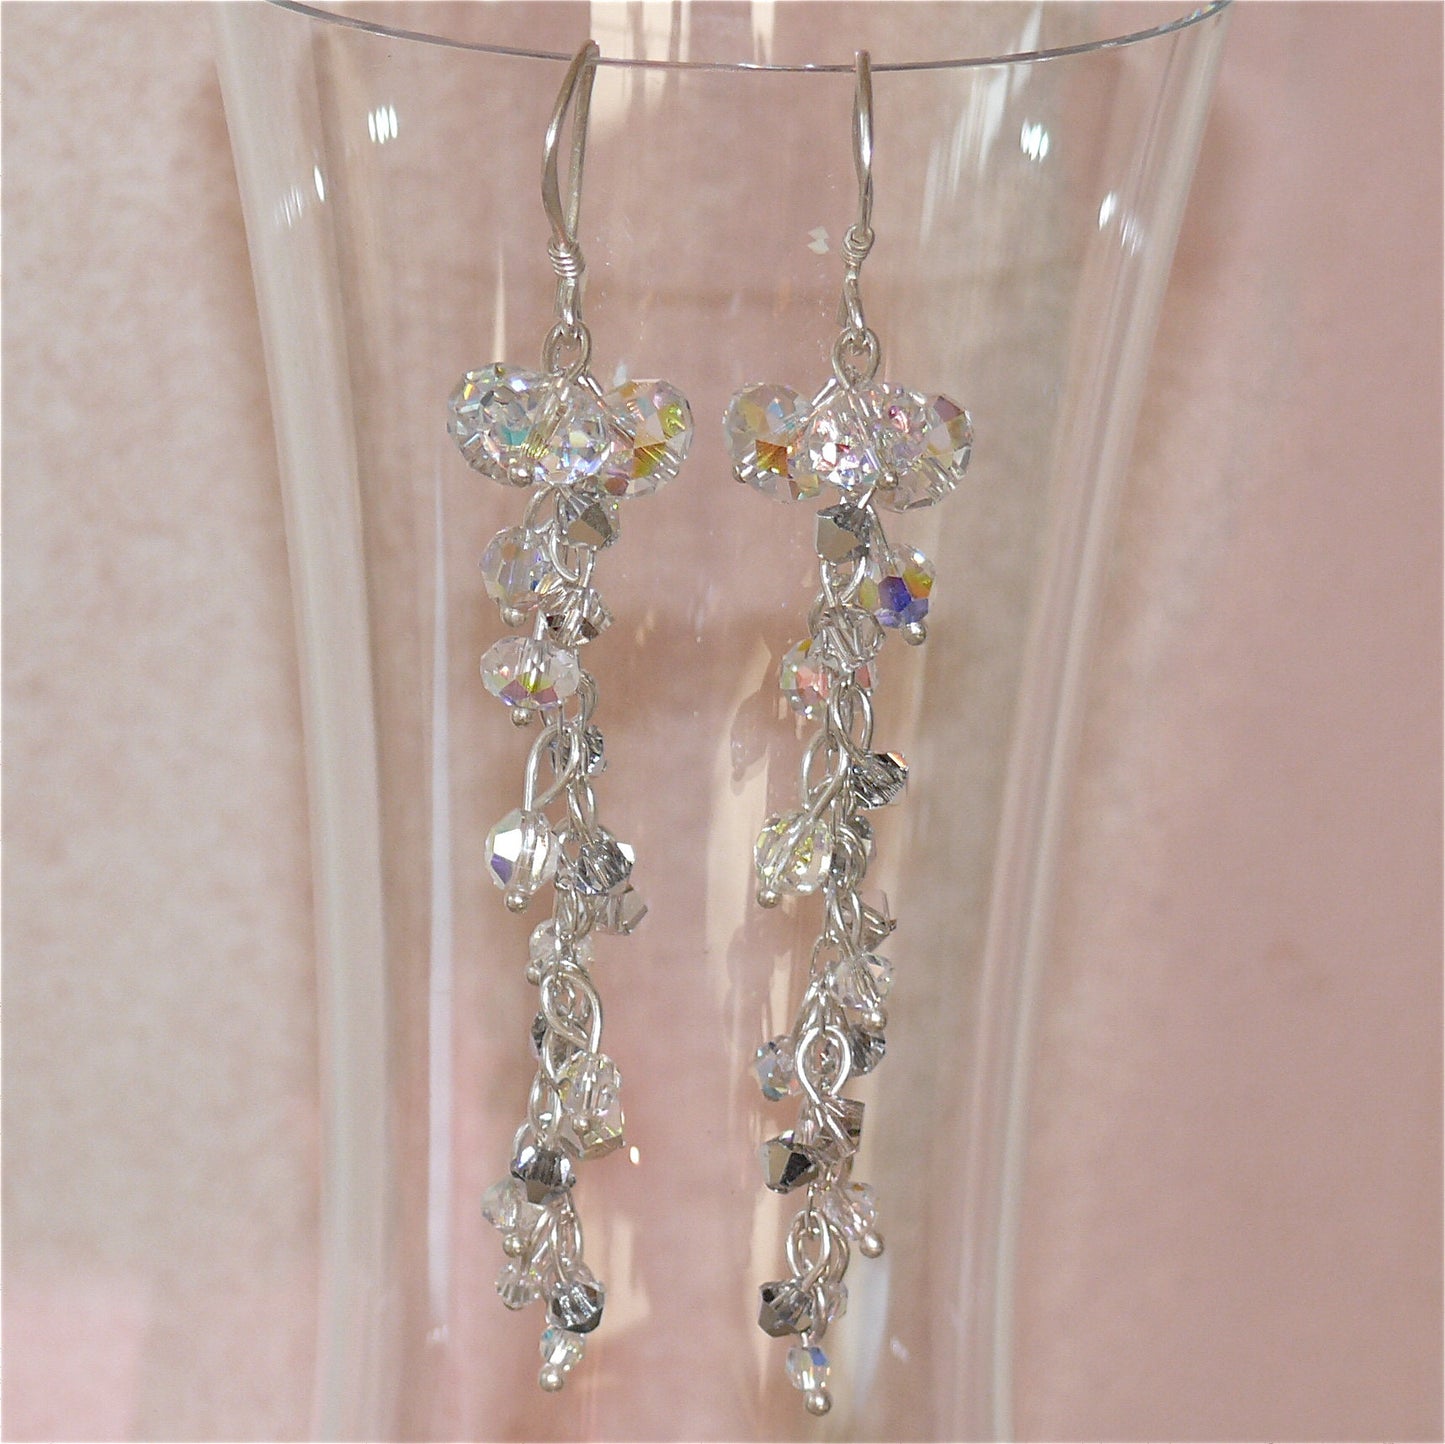 "Silver Lights" Trickle Crystal Earrings by Arpaia Lang